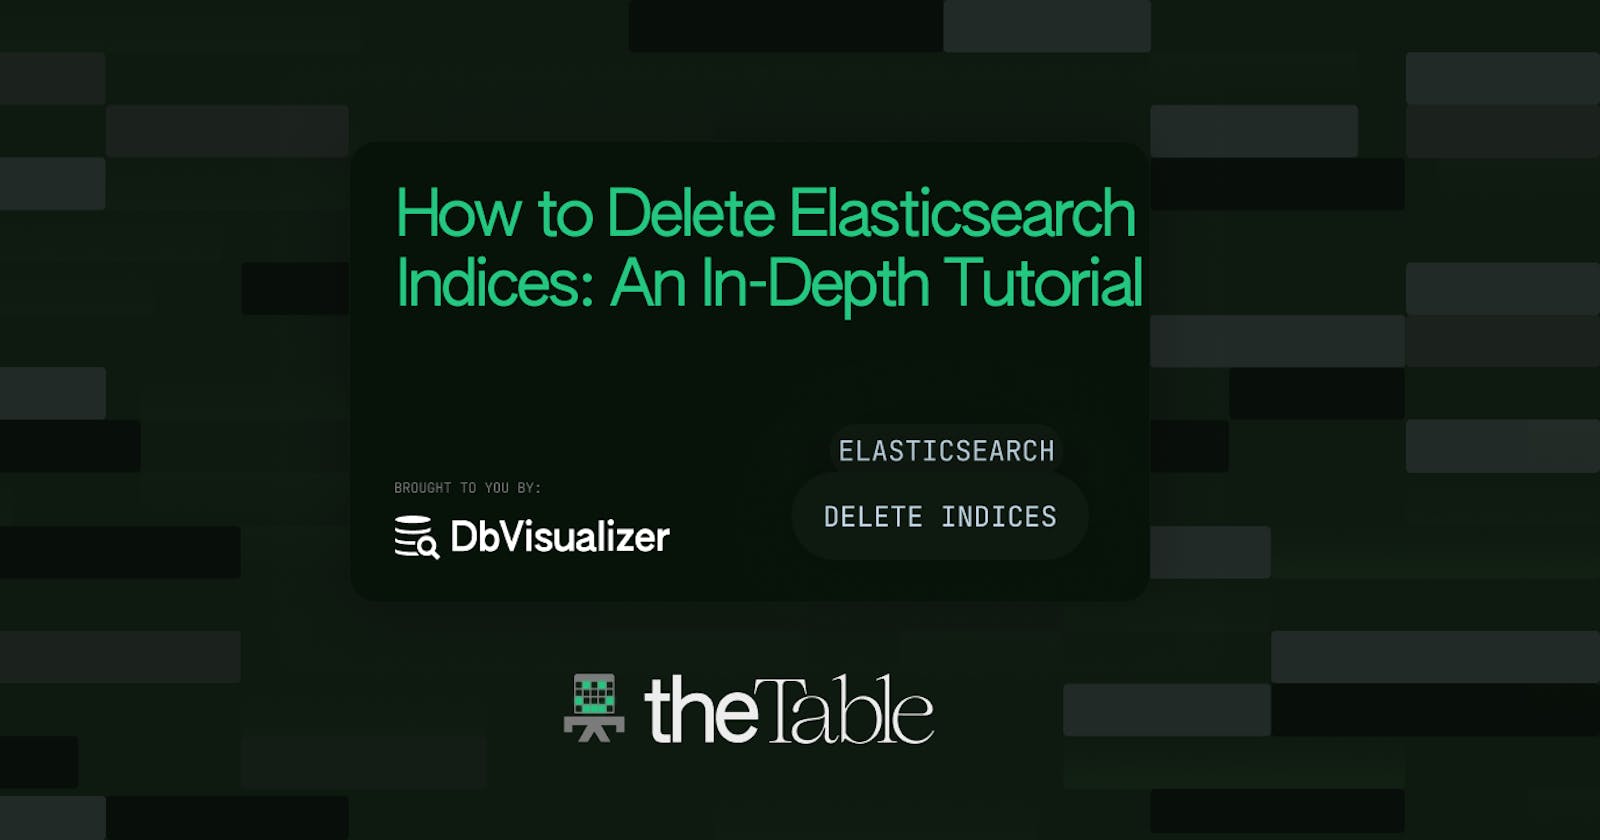 How to Delete Elasticsearch Indices: An In-Depth Tutorial